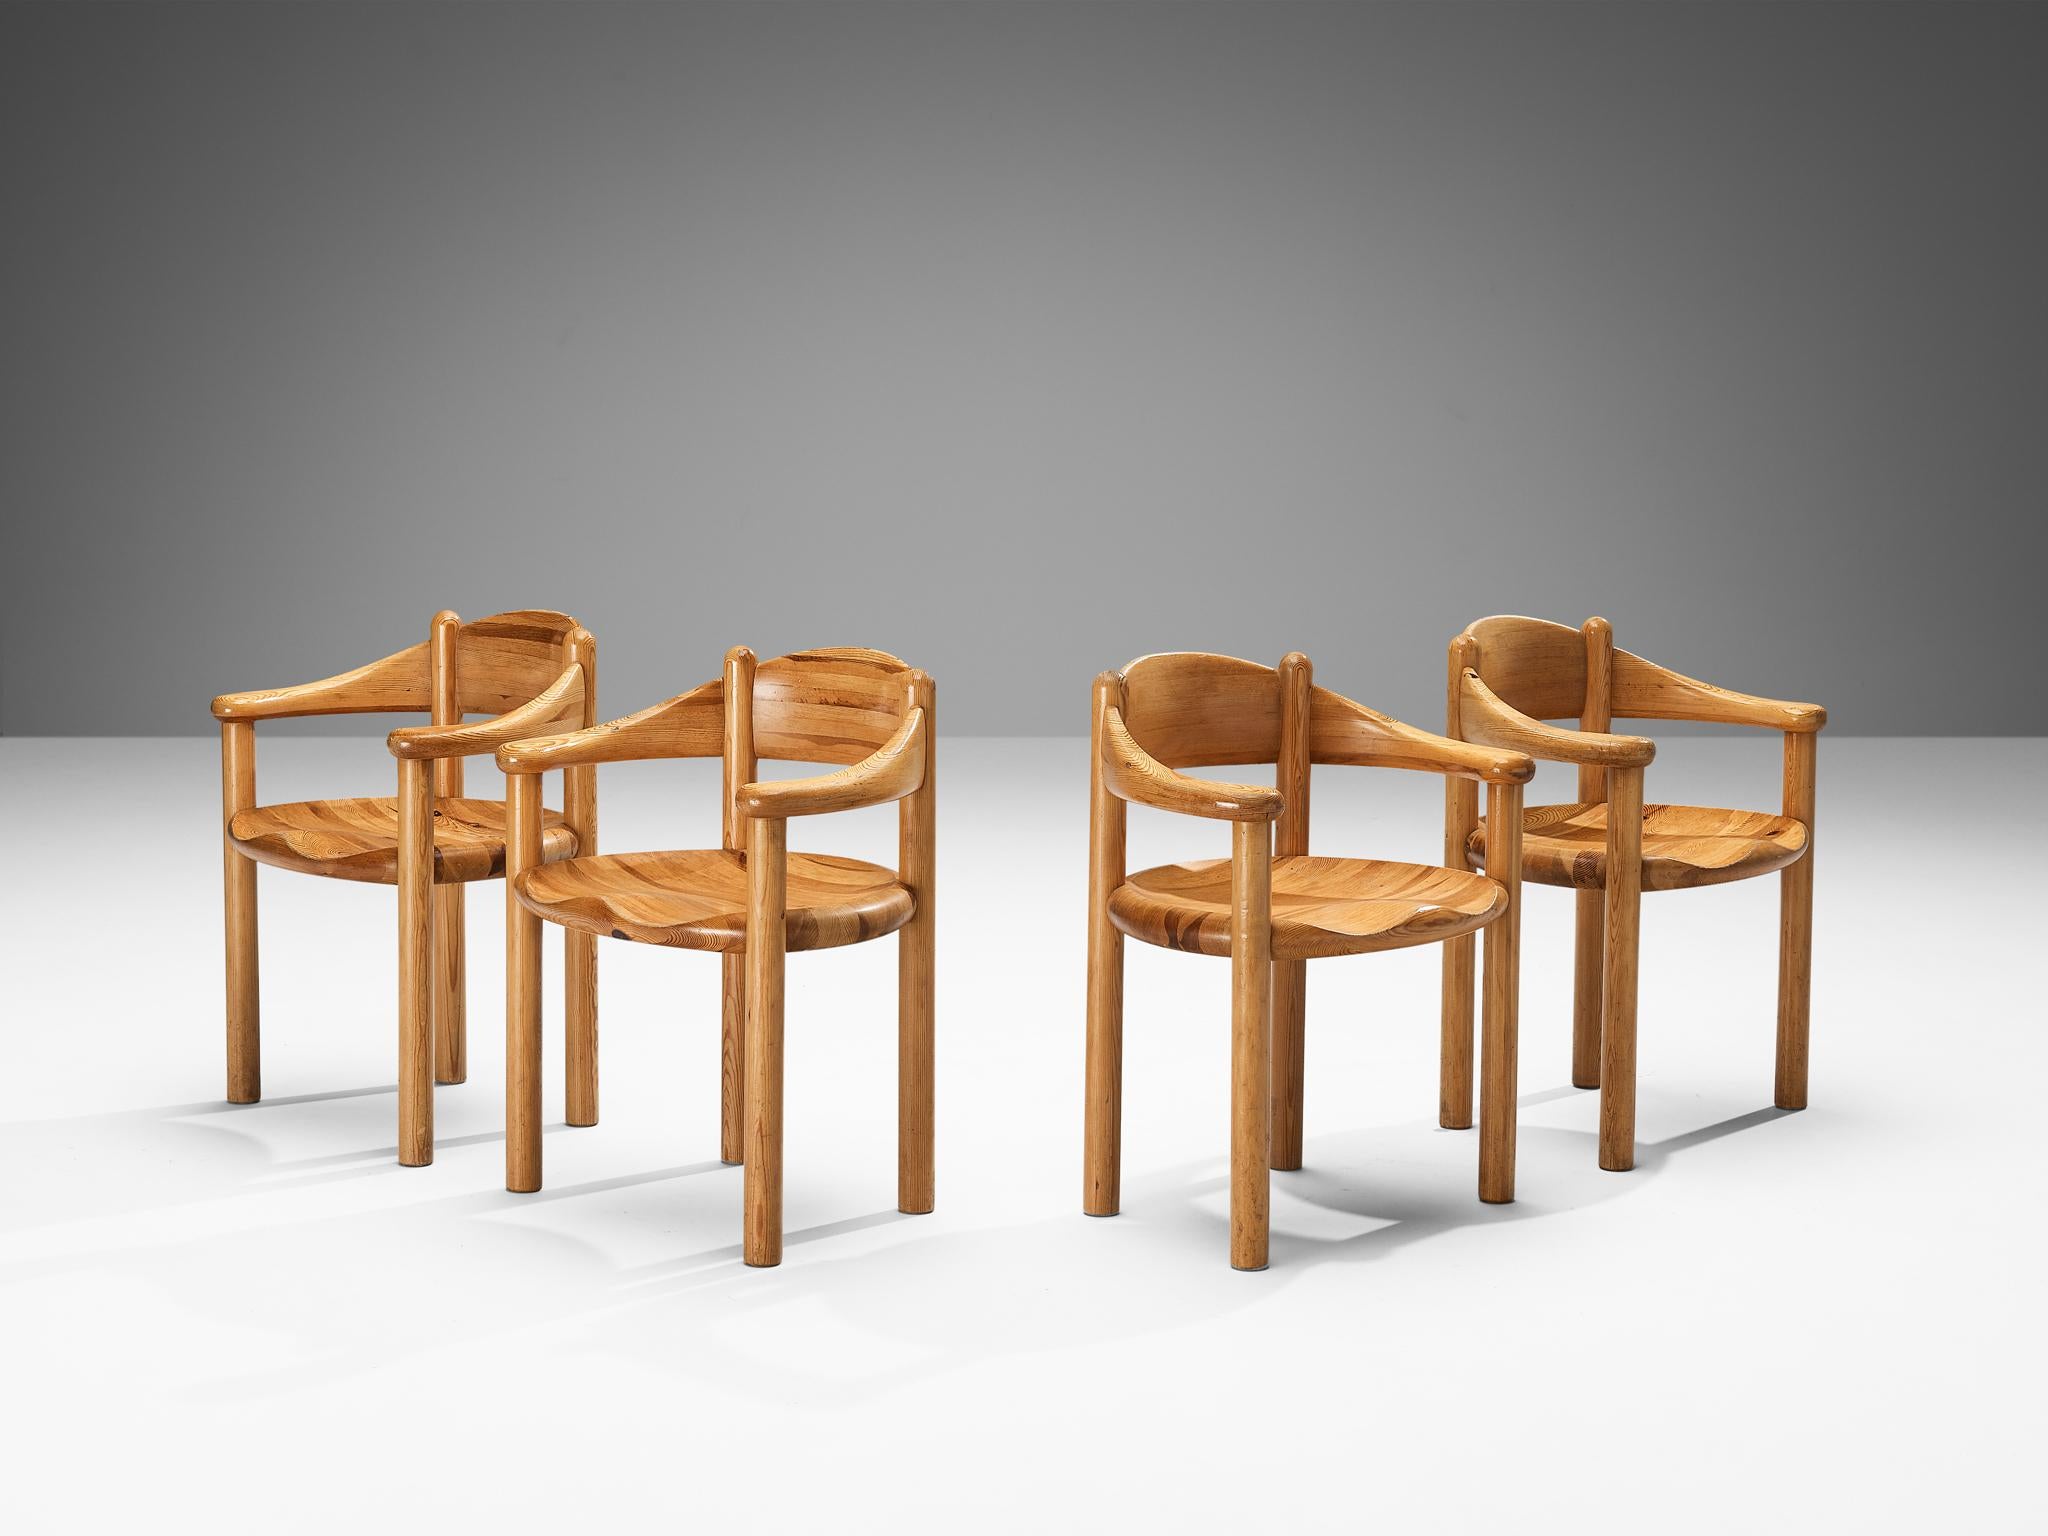 Rainer Daumiller for Hirtshals Savvaerk, set of four armchairs, pine, Denmark, 1970s.

Beautiful set of four organic and natural armchairs in solid pine. A simplistic design with a round seating and full attention for the natural expression and